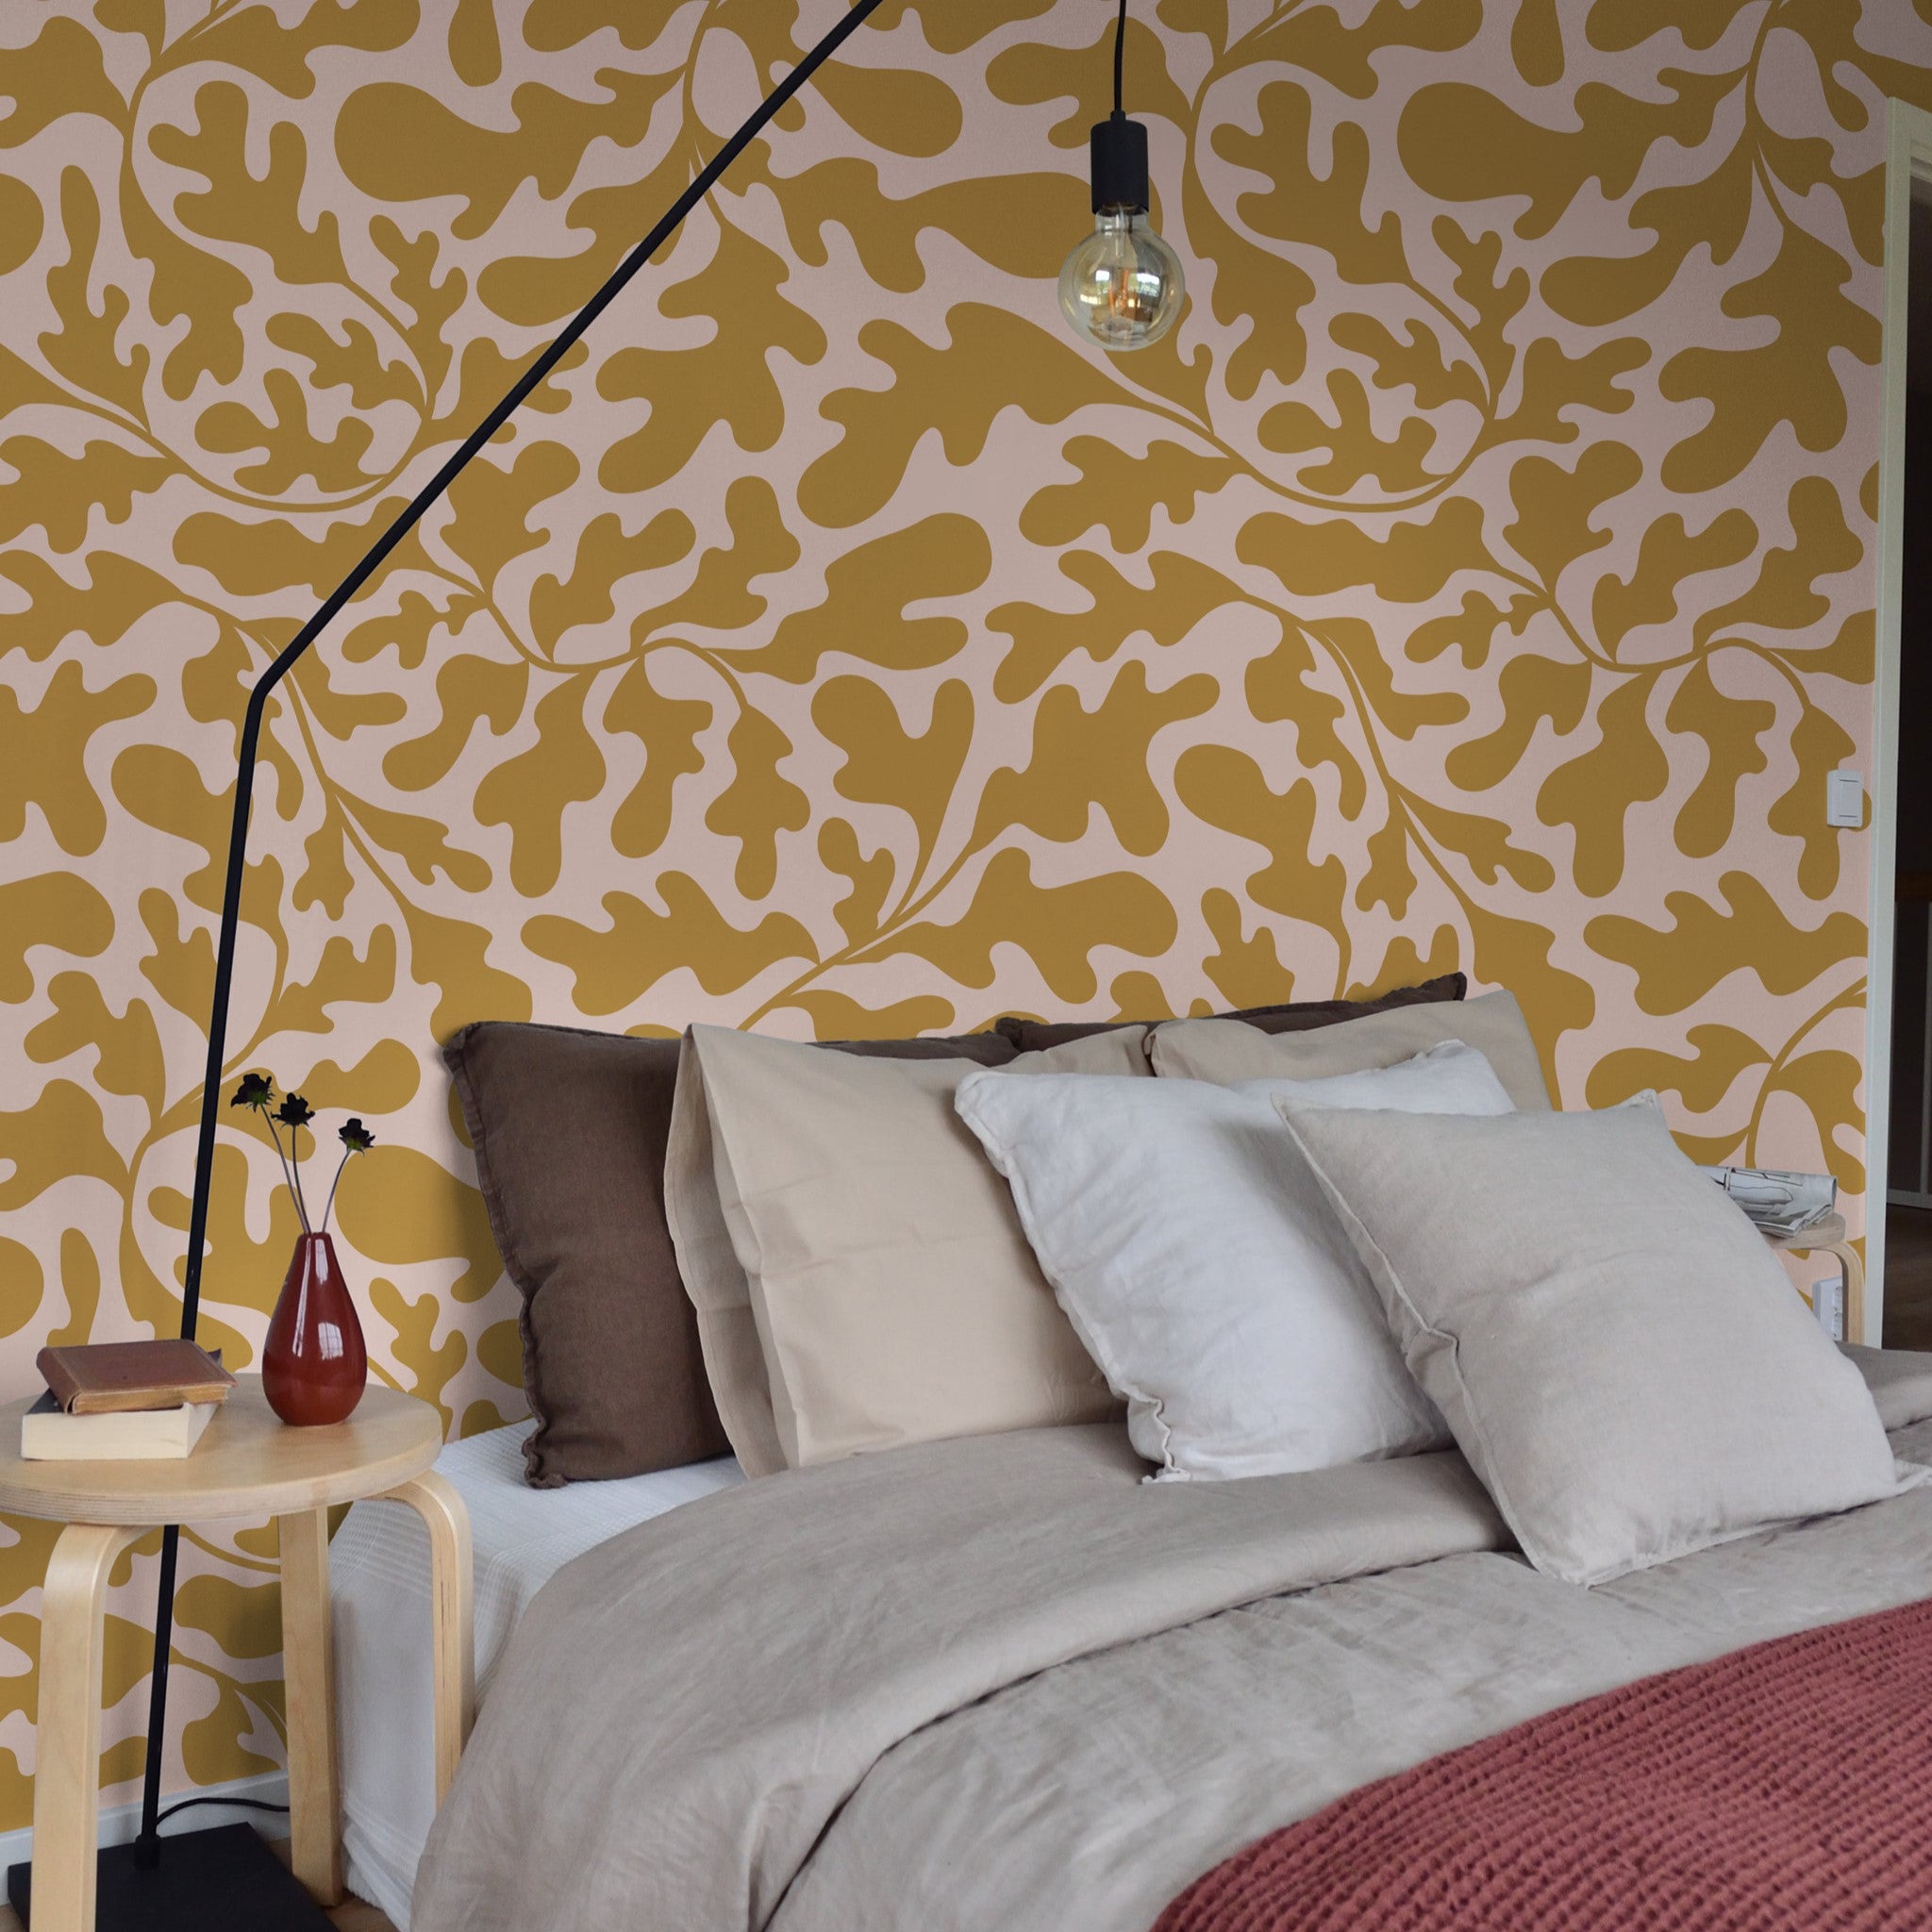 "Tawnie Wallpaper by Wall Blush in cozy bedroom with focus on the elegant patterned wall decor"